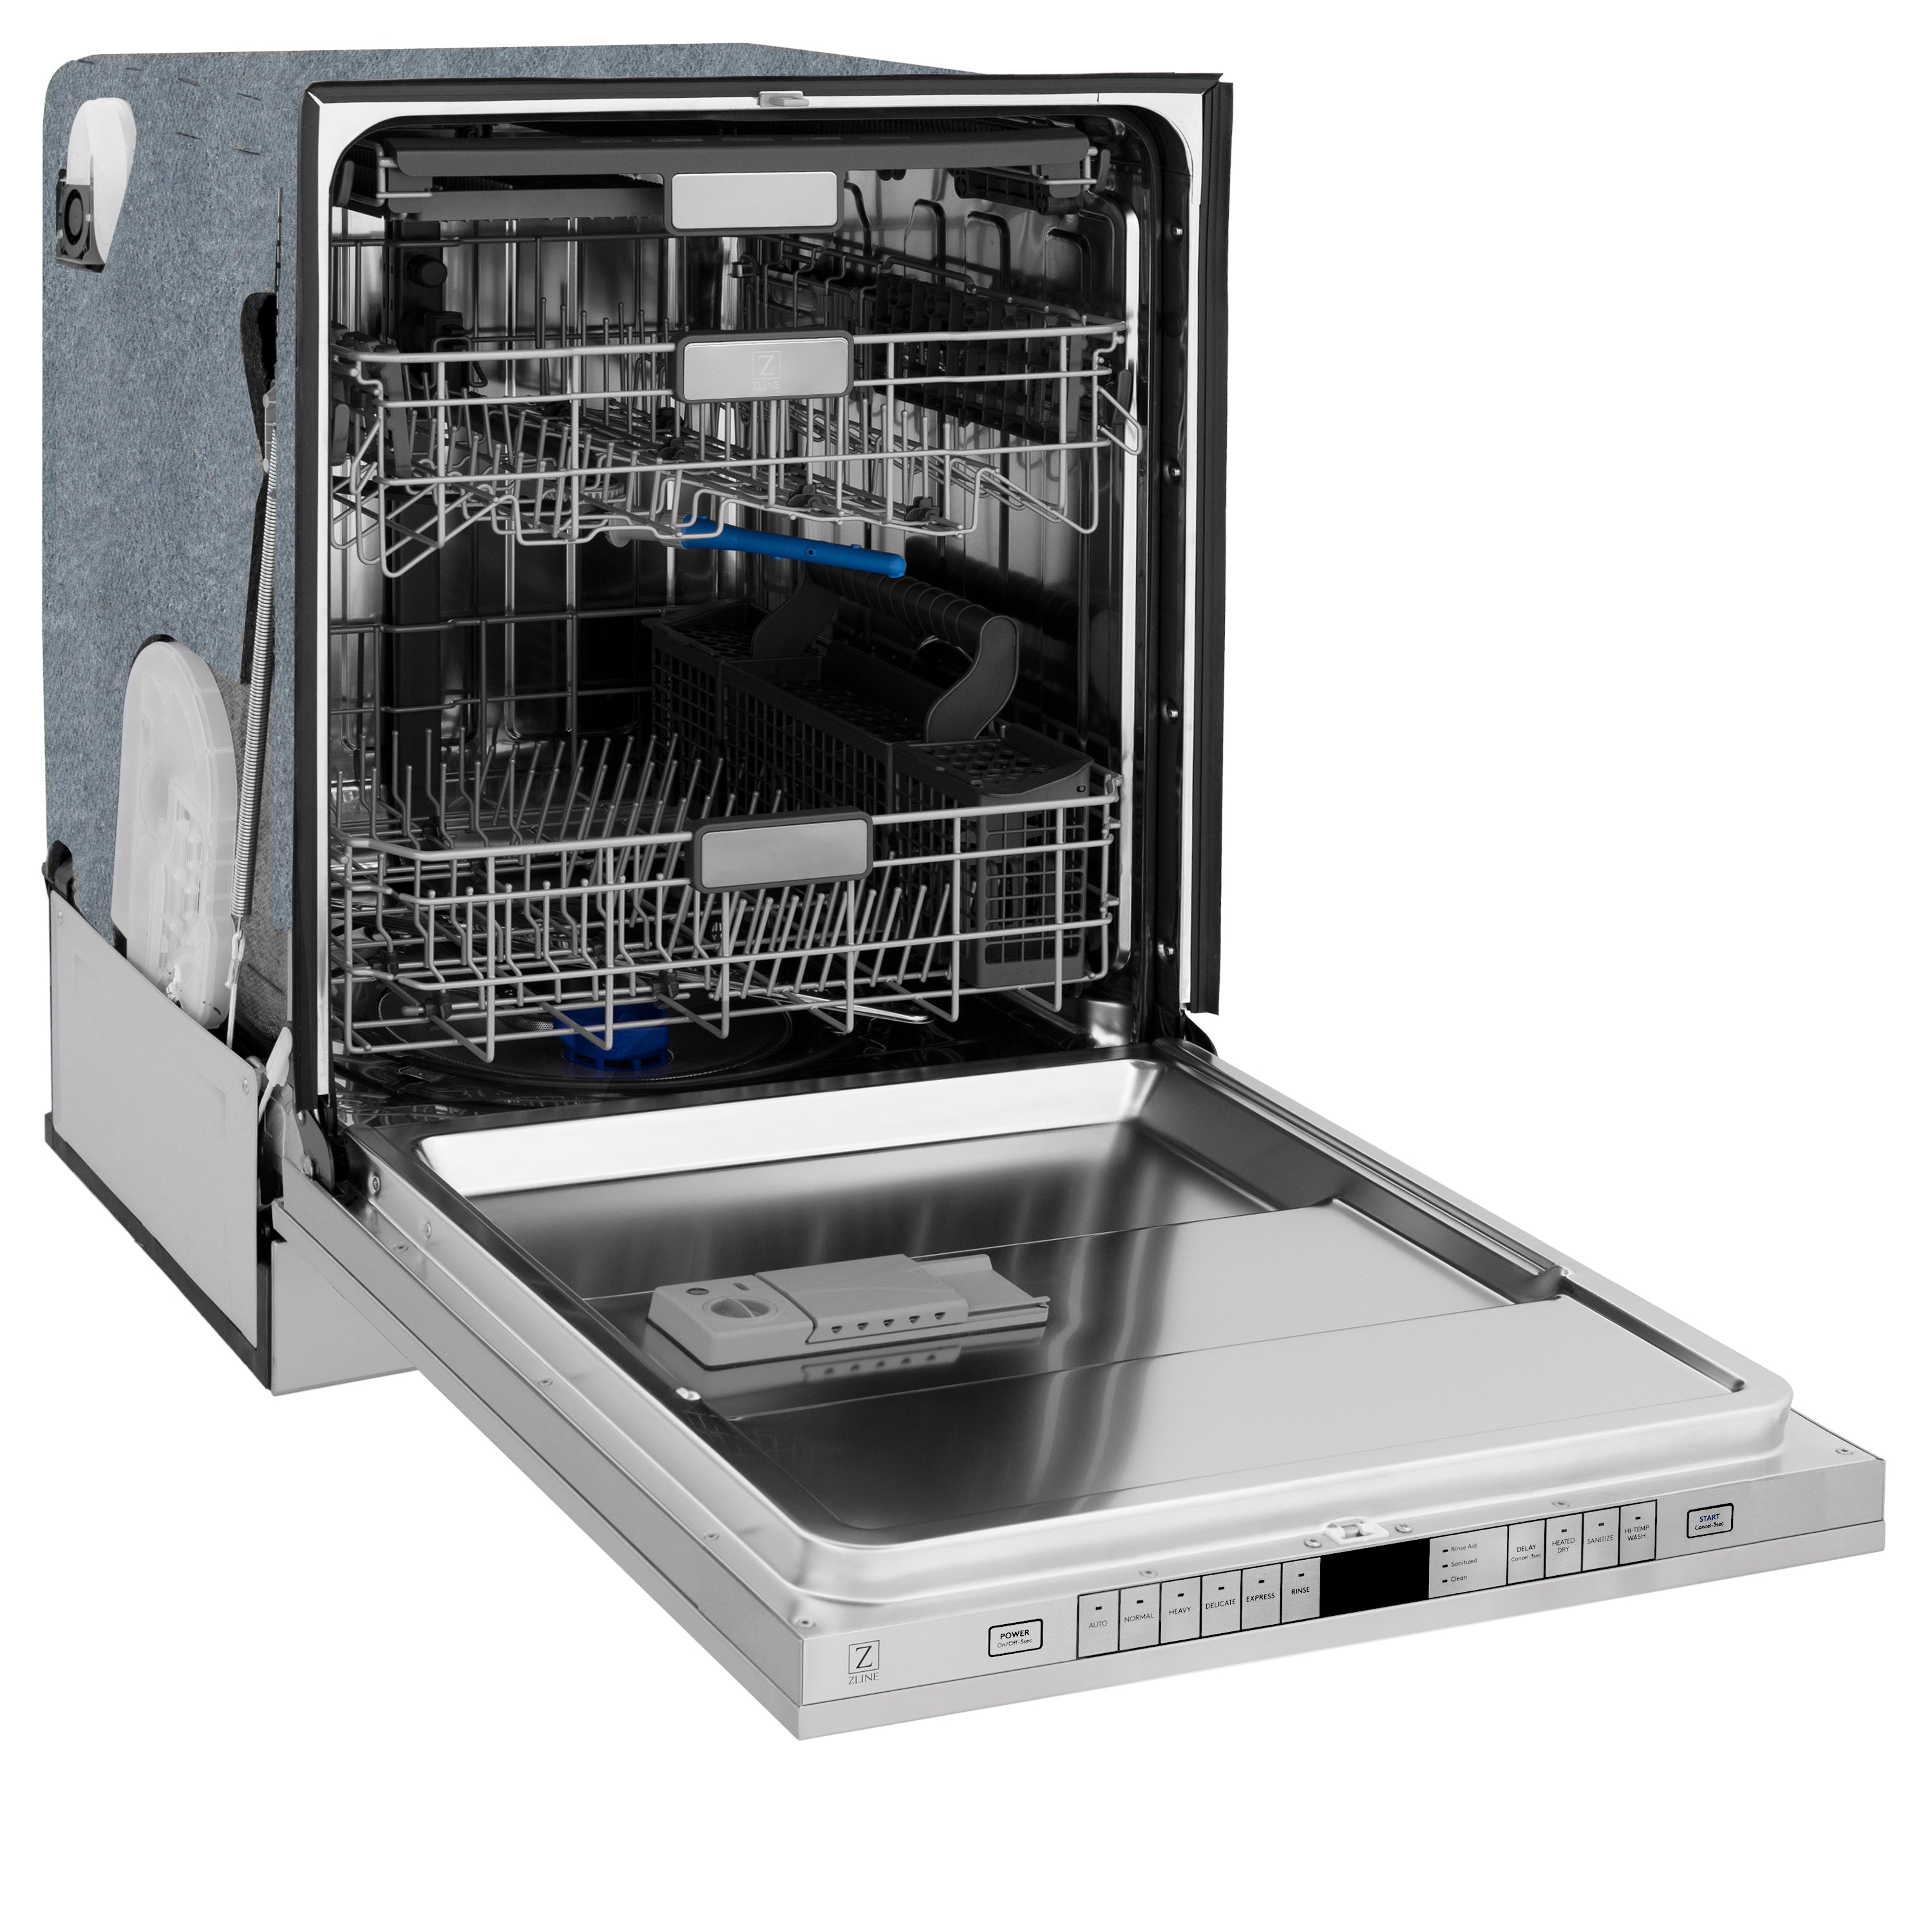 ZLINE Autograph Edition 24 in. Monument Dishwasher in Stainless Steel with Matte Black Handle (DWMTZ-304-24-MB) Side View Door Open